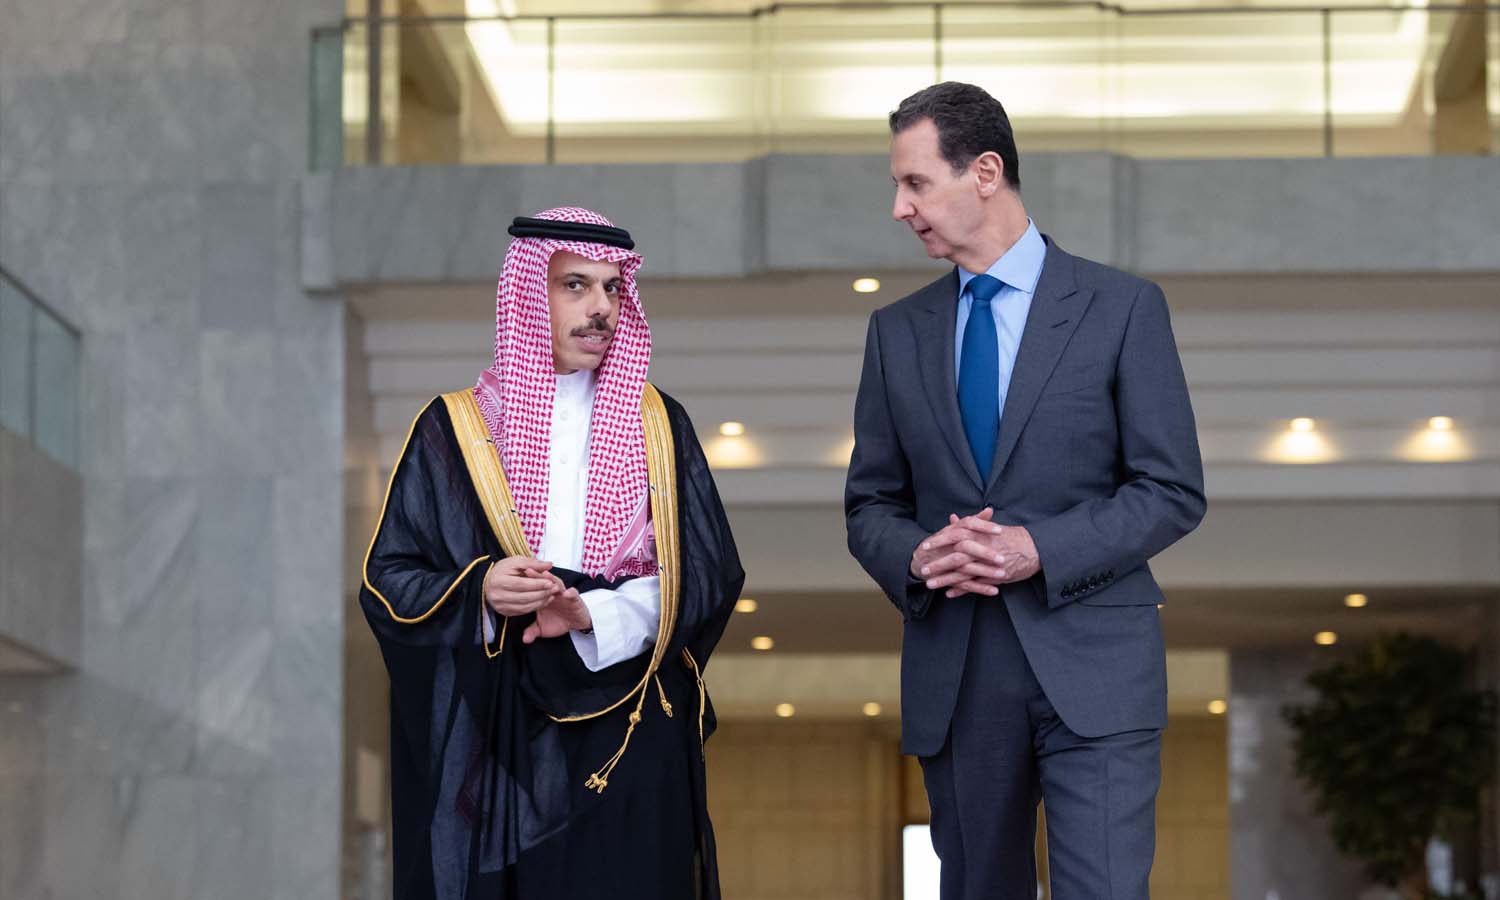 The Saudi Foreign Minister, Faisal bin Farhan, meets with the head of the Syrian regime, Bashar al-Assad, on his first visit to Damascus since 2011 - April 18, 2023 (SPA)